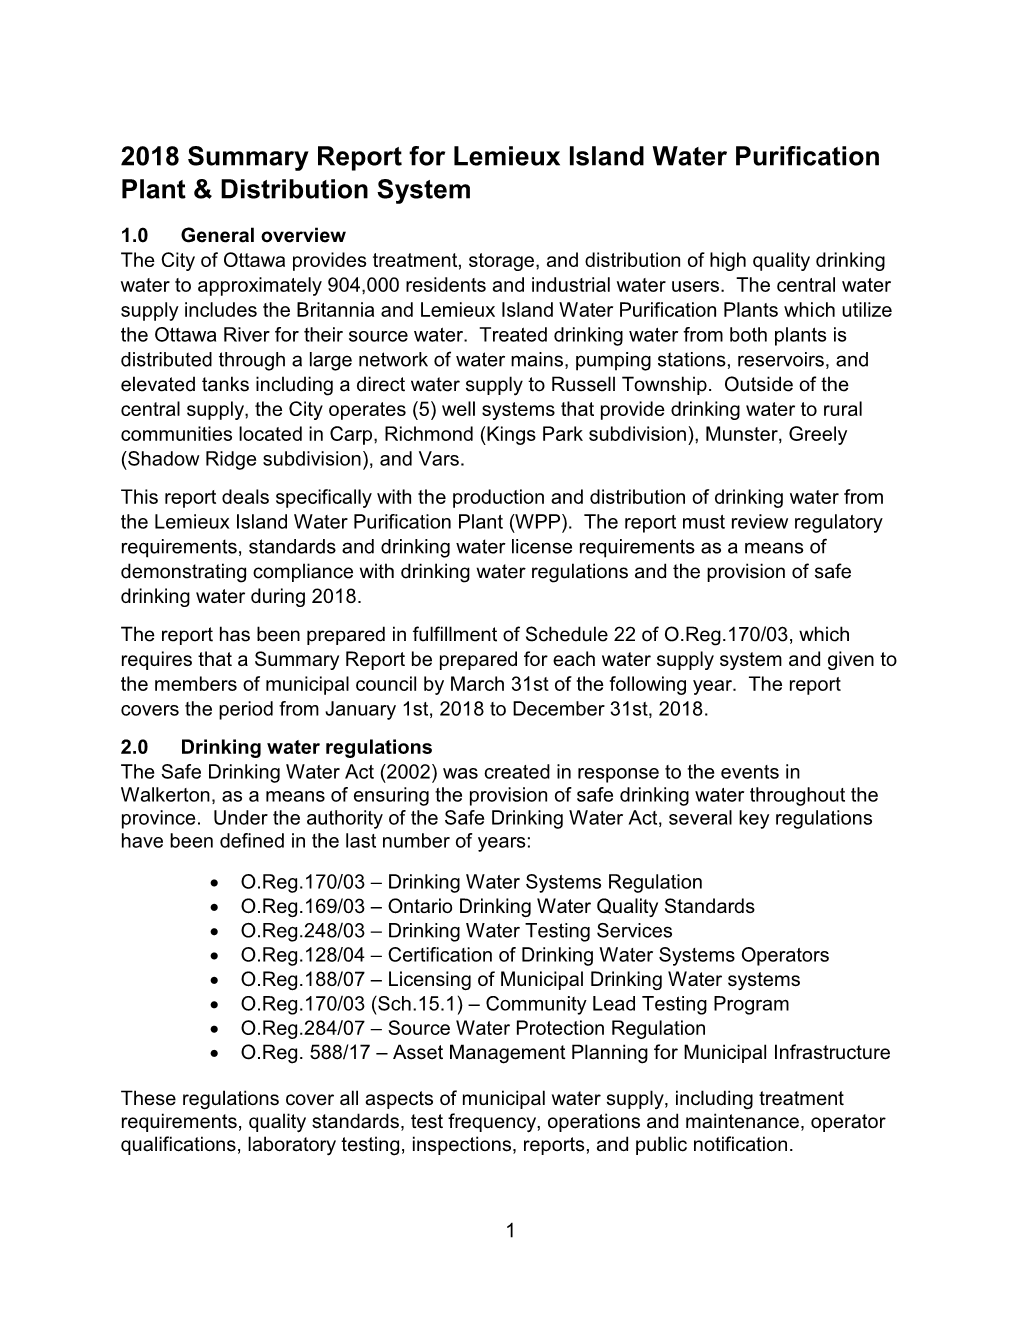 2018 Summary Report for Lemieux Island Water Purification Plant & Distribution System